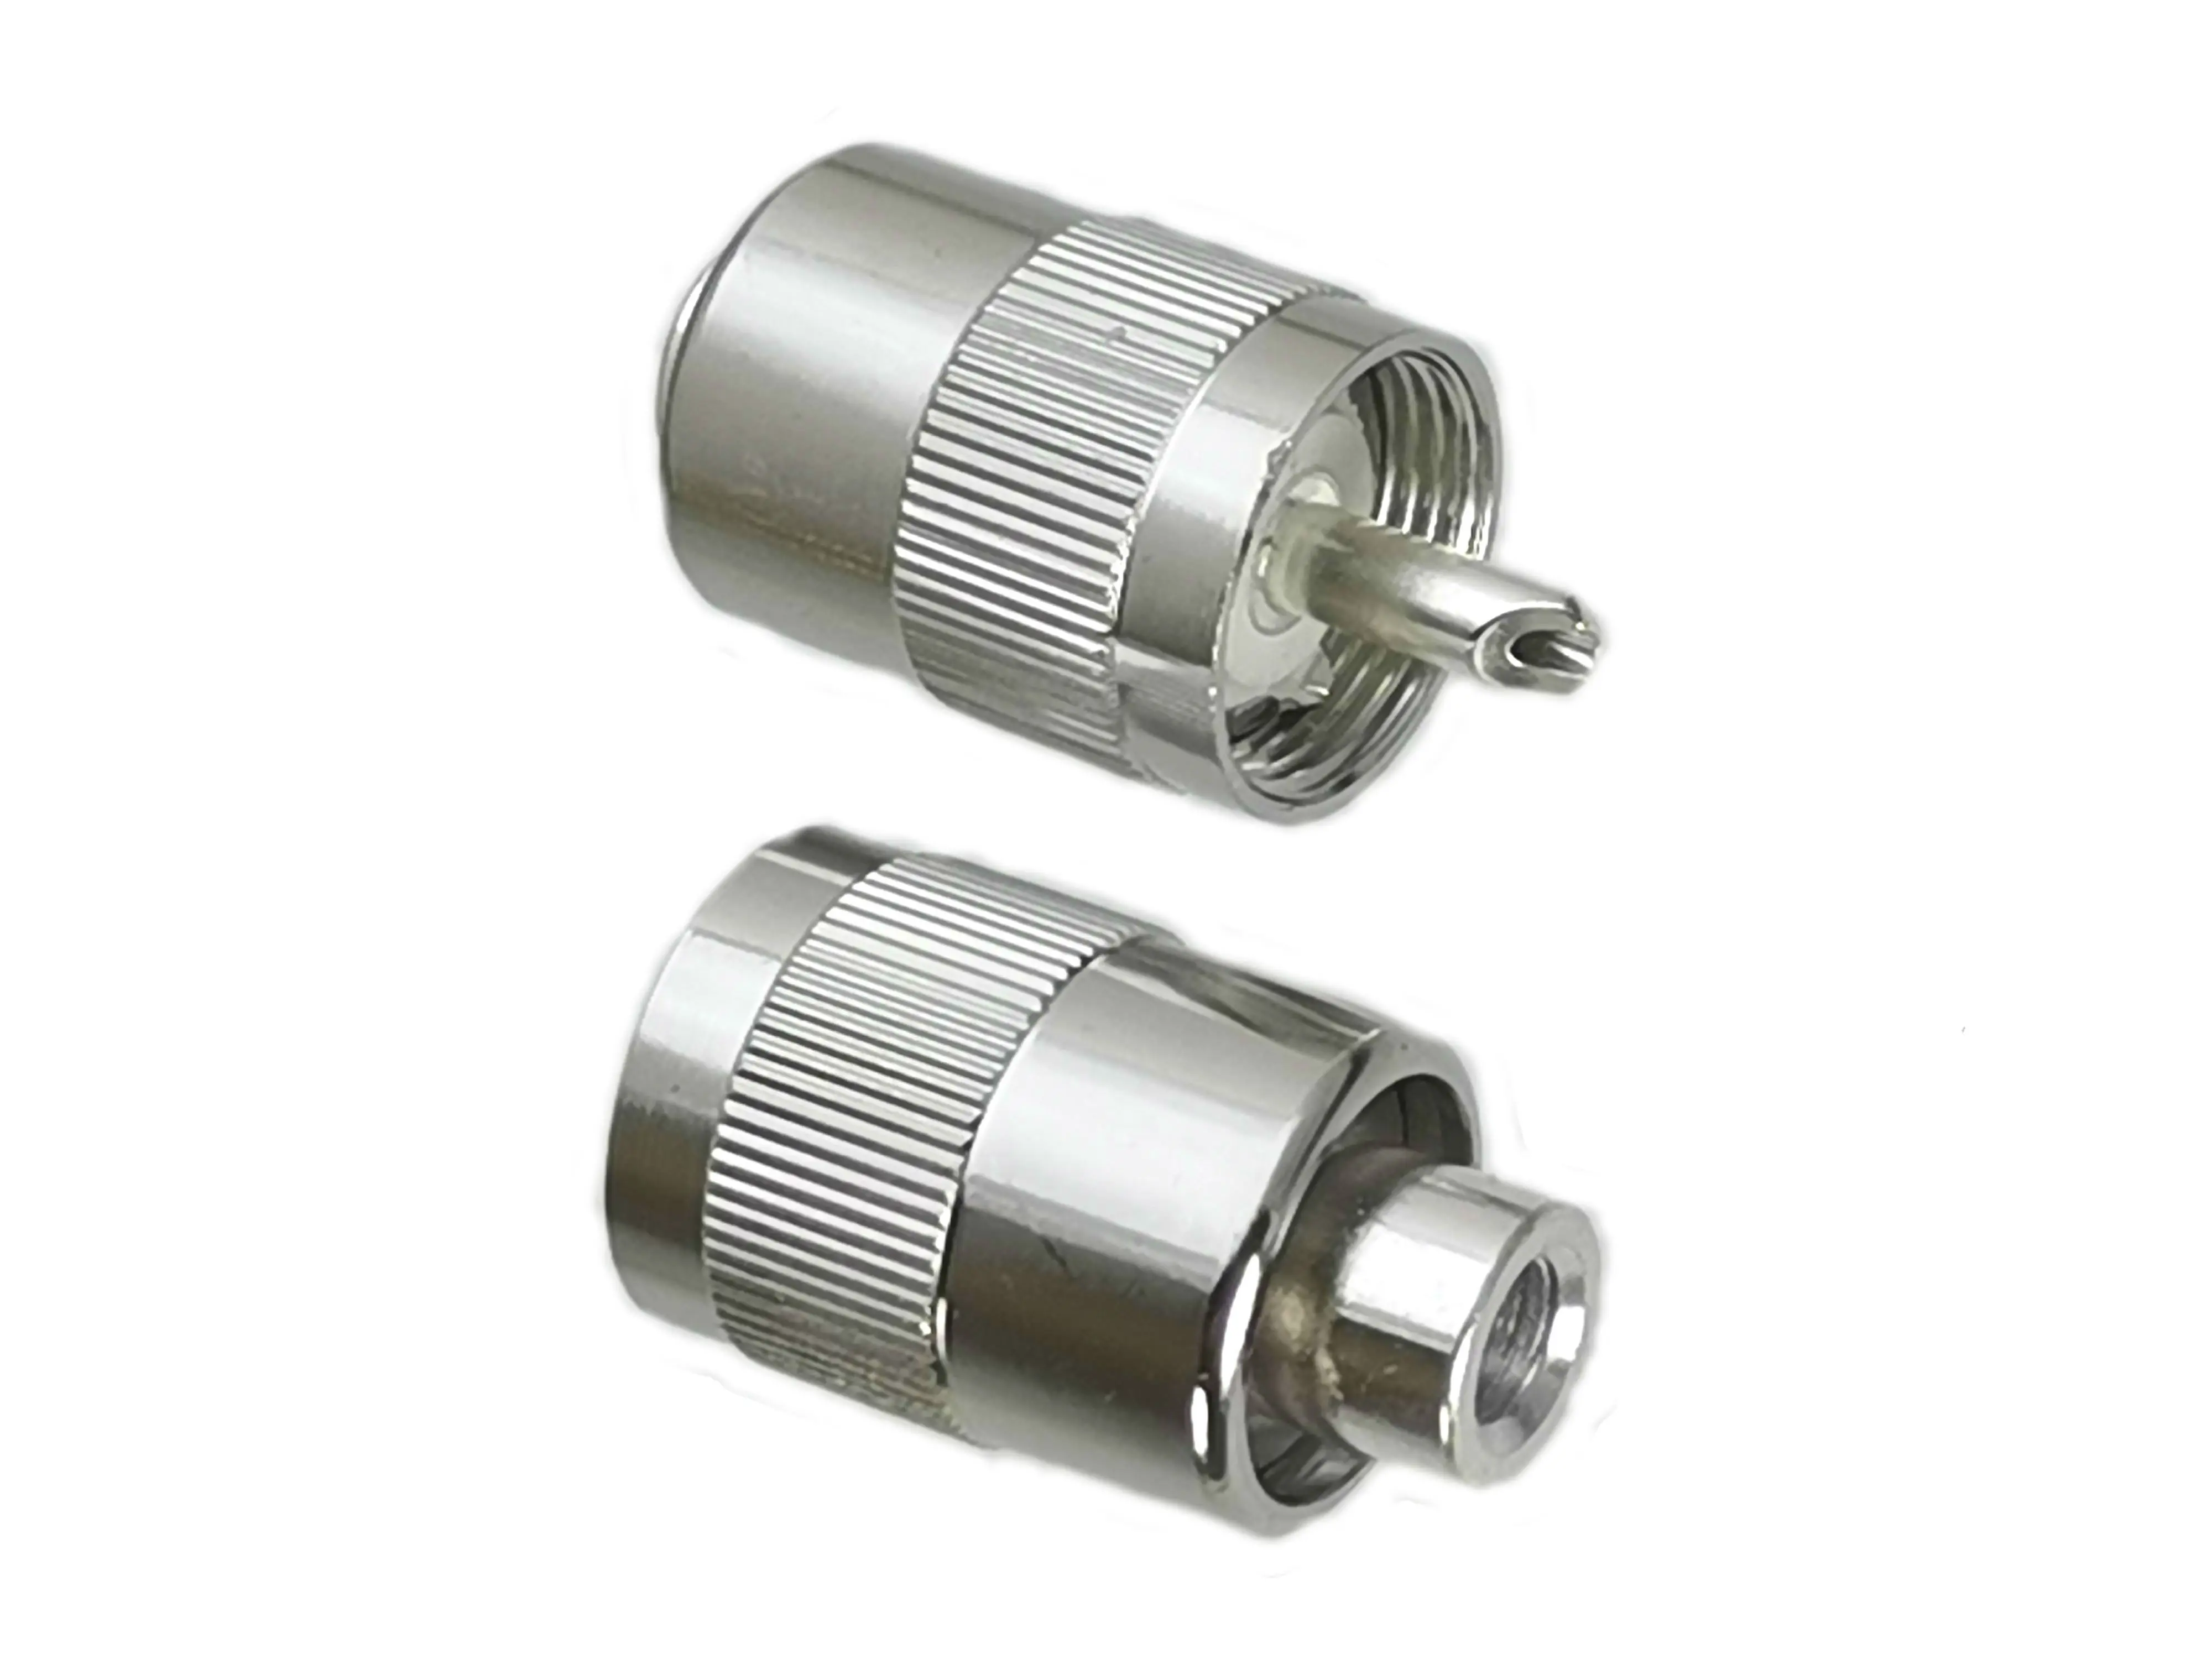 1pcs Connector UHF PL259 Male Plug Solder RG58 RG142 LMR195 RG400 RF Coaxial Adapter Wire Terminal Brass